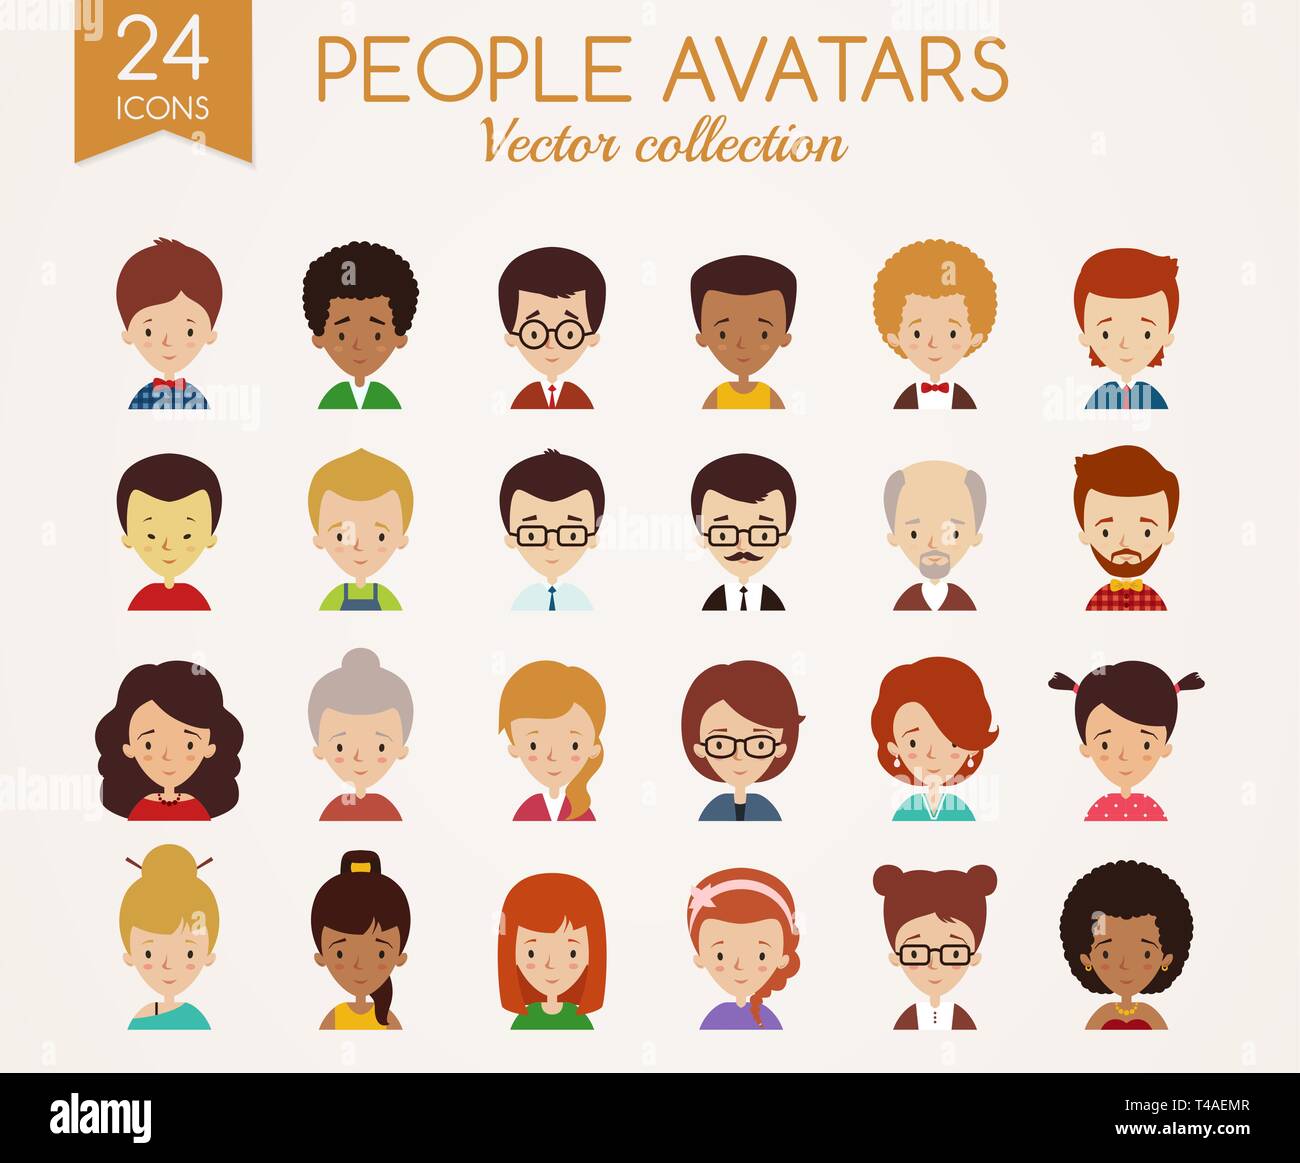 Cute avatars set. Male and Female faces. Diverse people with different nationalities, ages, clothing and hair styles. Vector icons isolated on white. Stock Vector